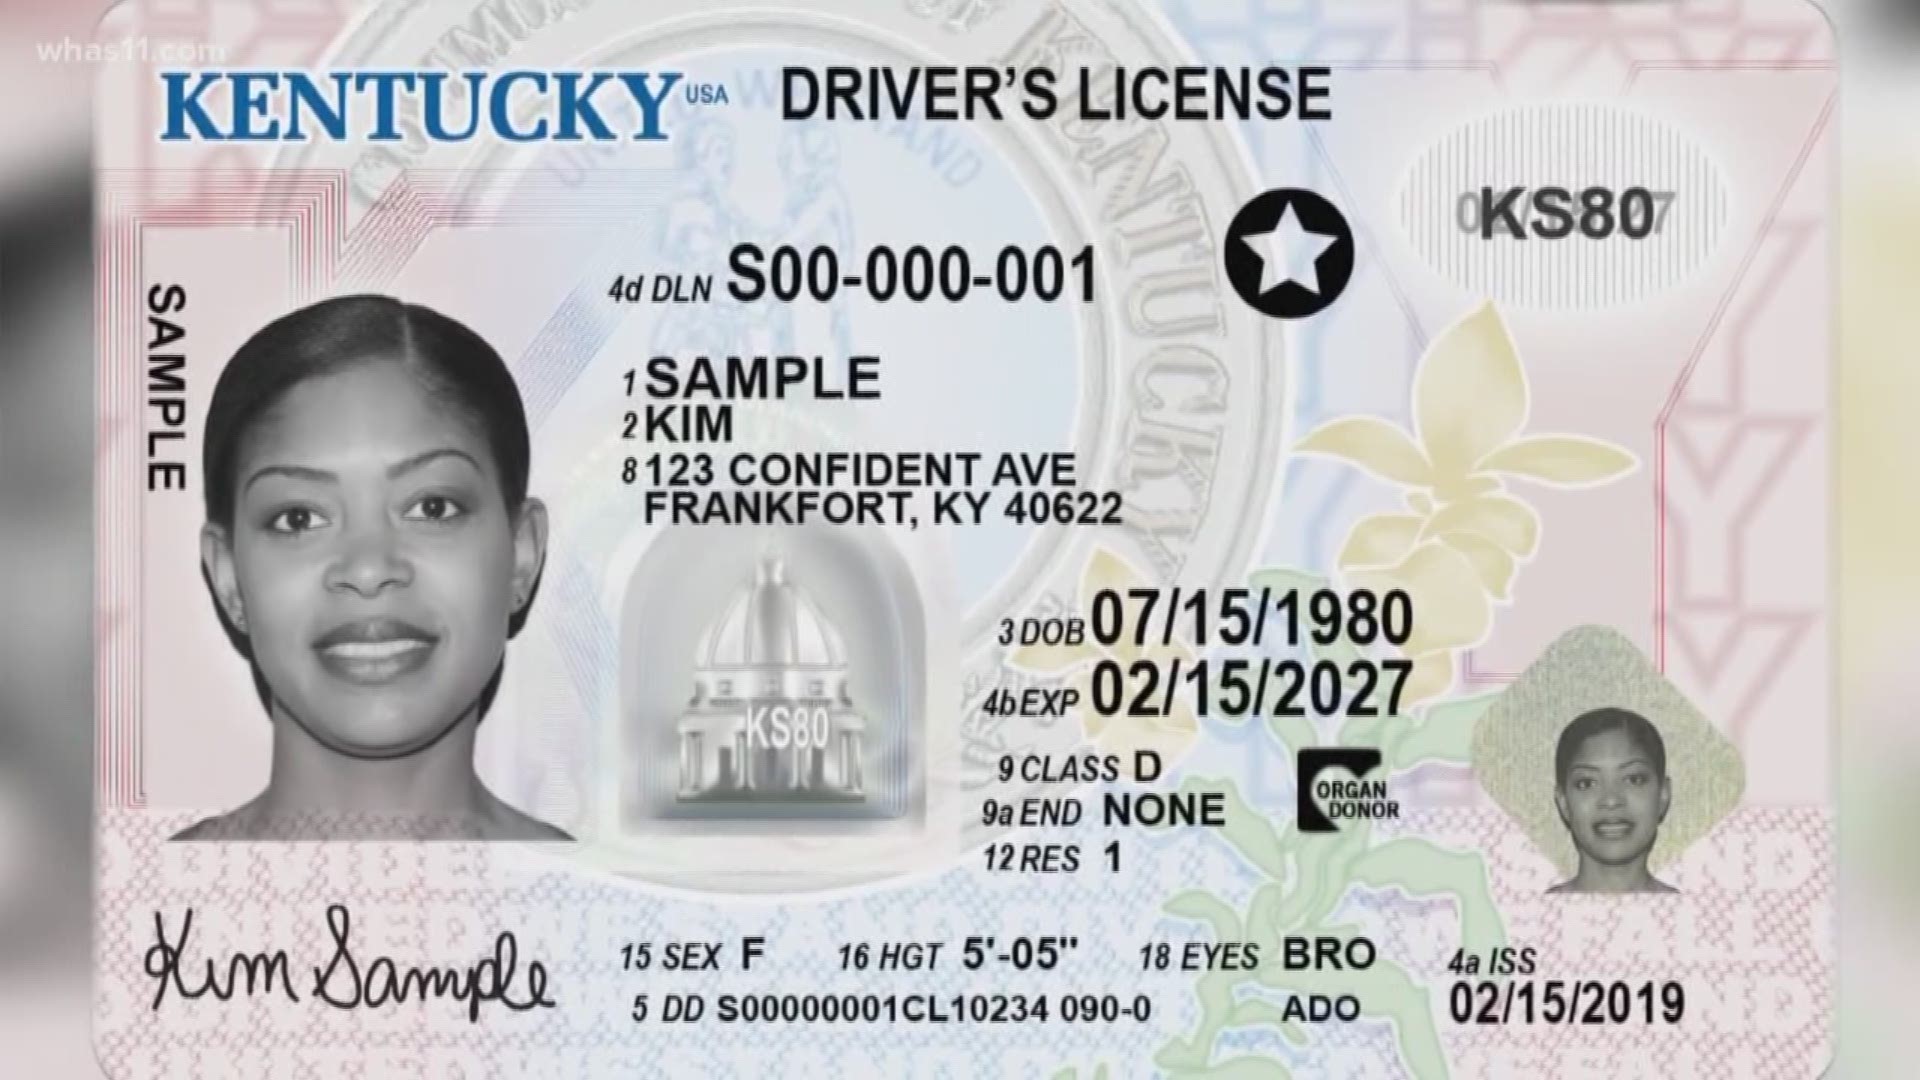 The Kentucky Transportation Cabinet said it will work with lawmakers on developing a network of regional offices to issue the Real ID licenses.